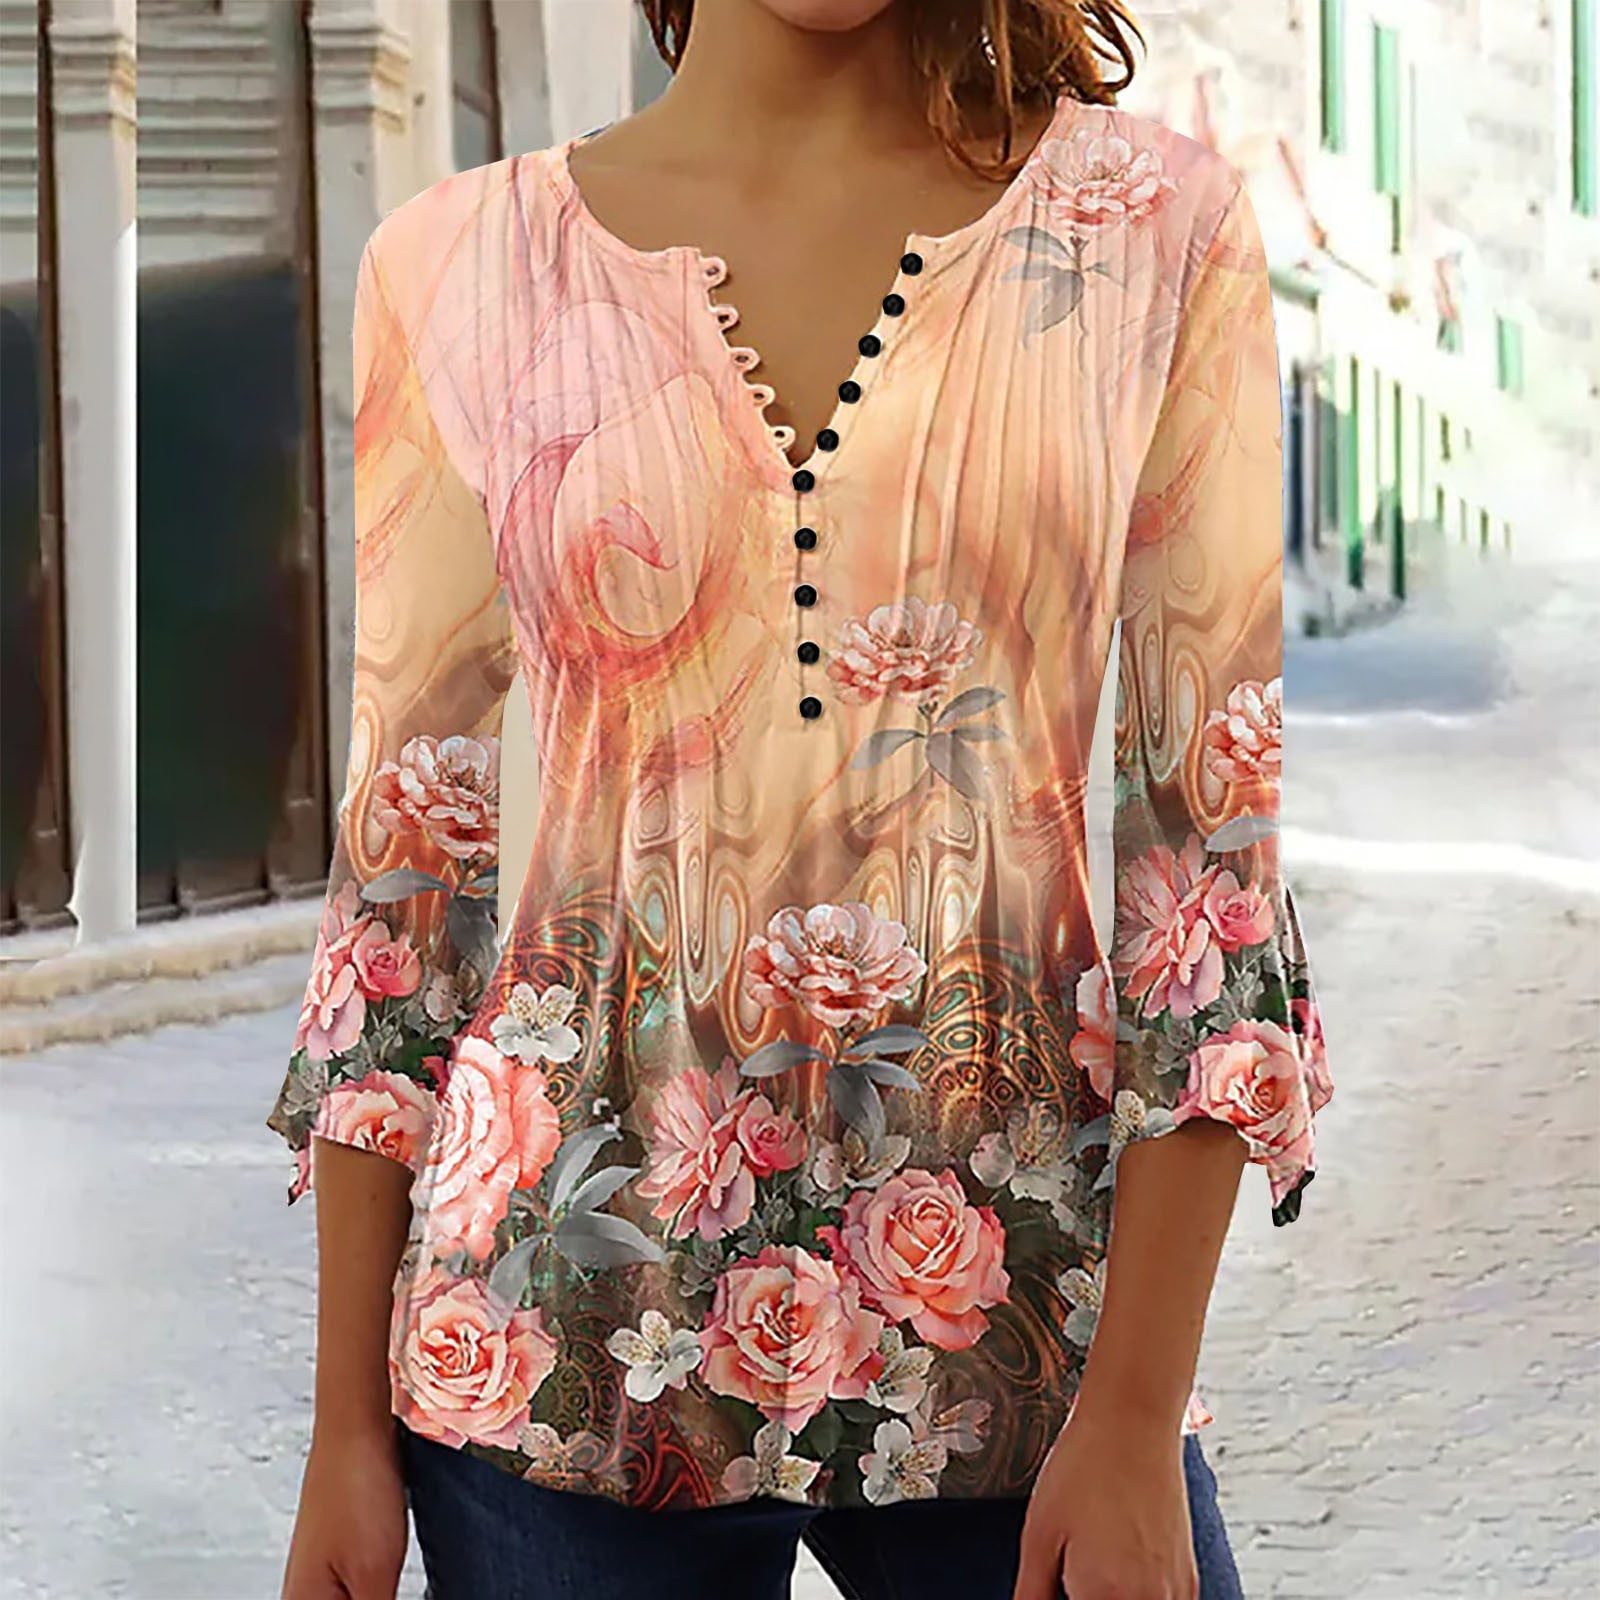  Blouses for Women Casual Women's 3/4 Sleeve Tops Slim Fit Cute  Floral Tees Shirts Summer Beach Blouses Basic V-Neck T Shirts Pleated Tops  : Deportes y Actividades al Aire Libre